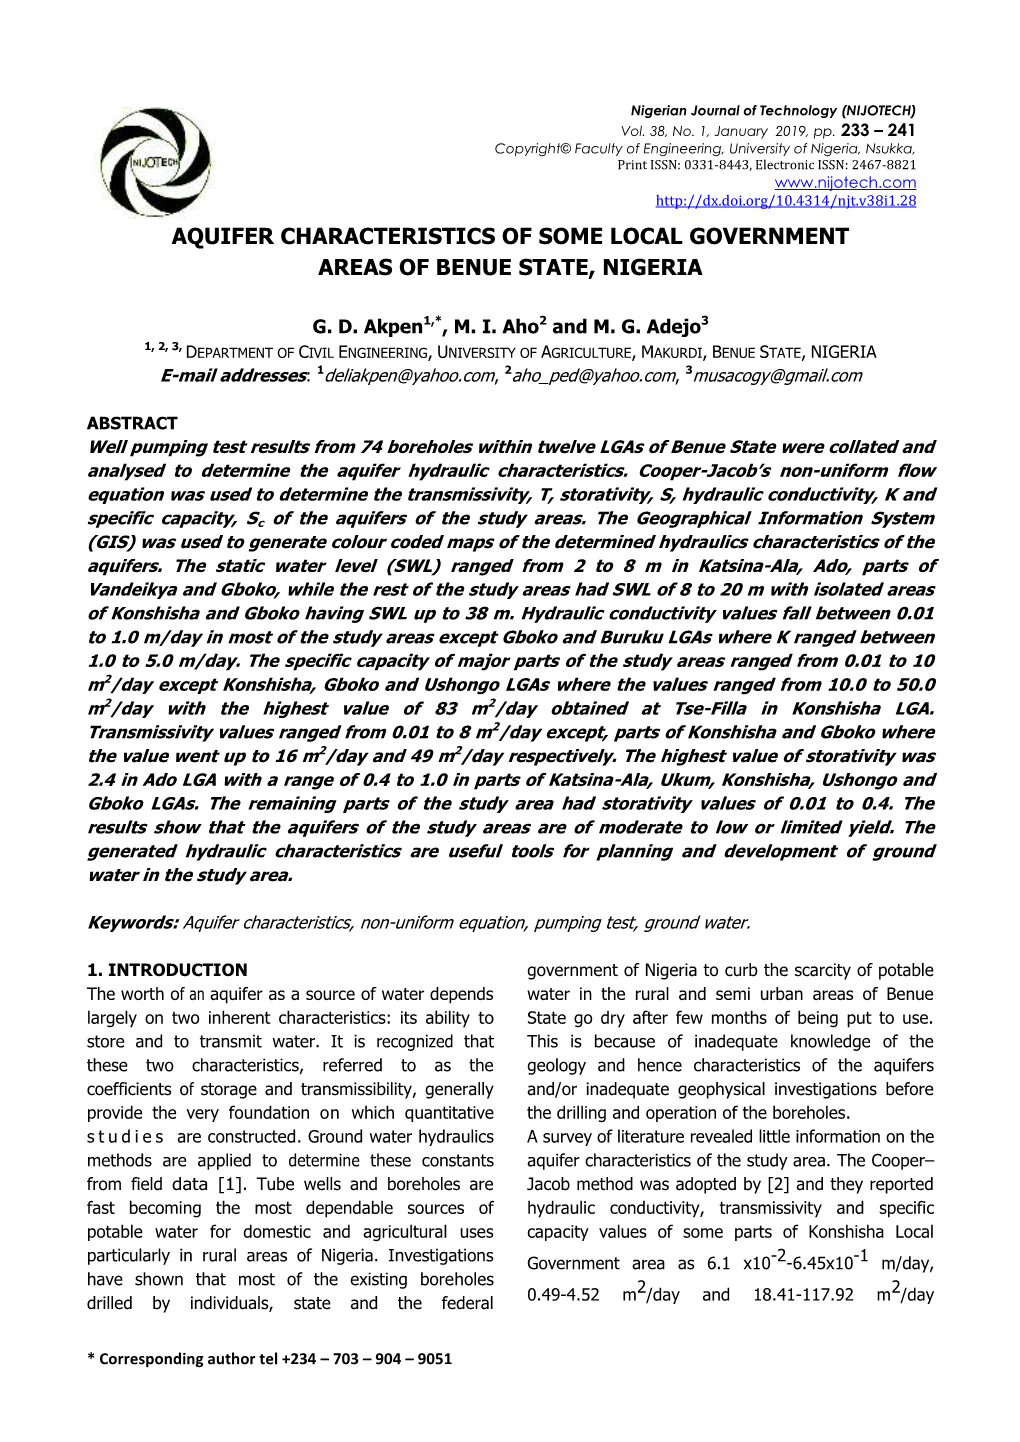 Aquifer Characteristics of Some Local Government Areas of Benue State, Nigeria